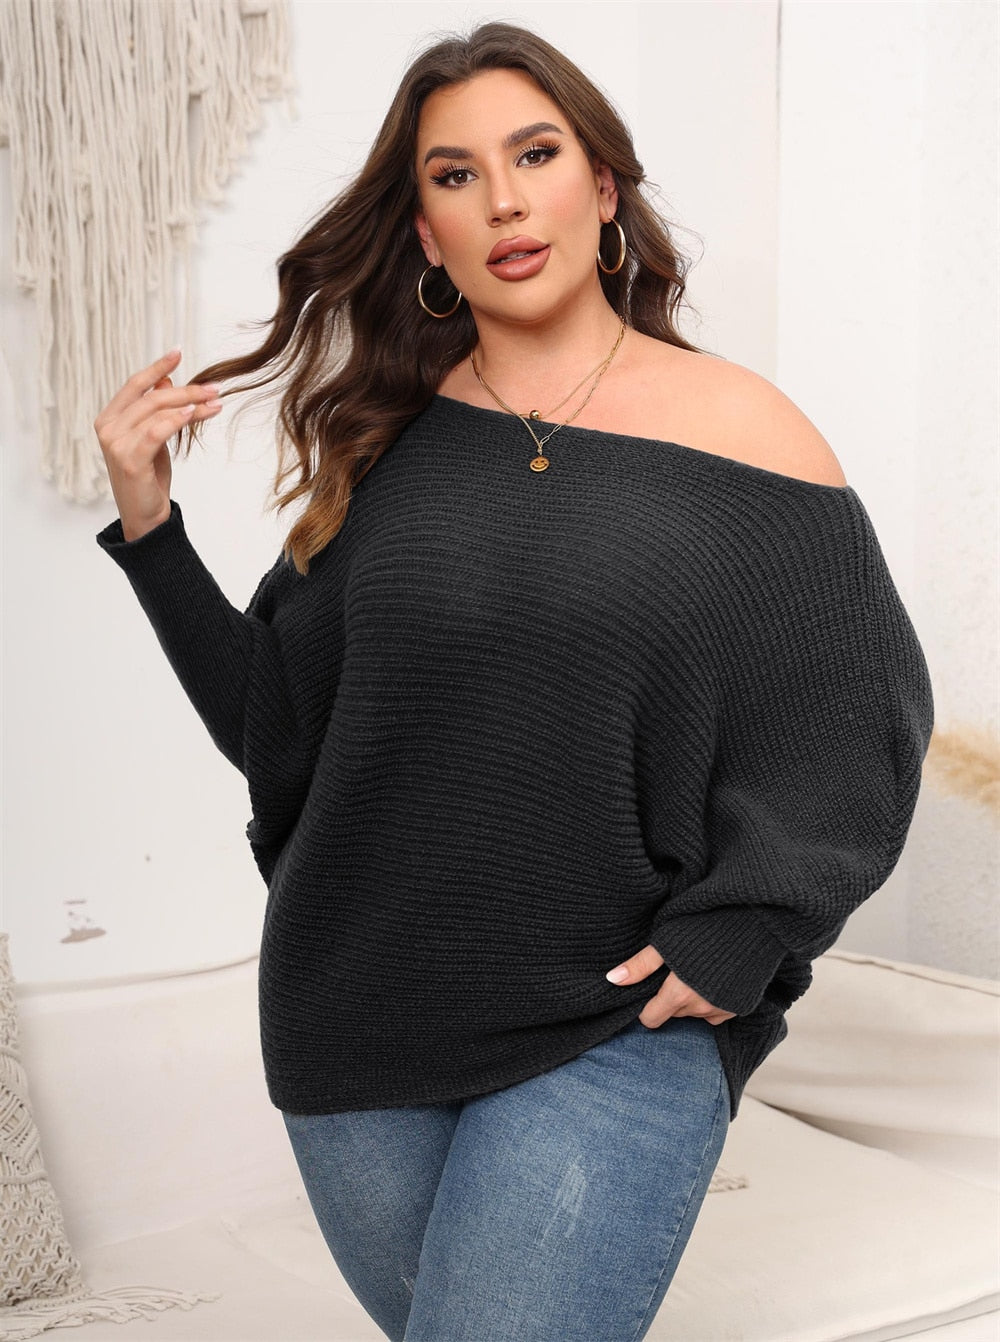 Women's Casual Off Shoulder Batwing Knitted Sweater